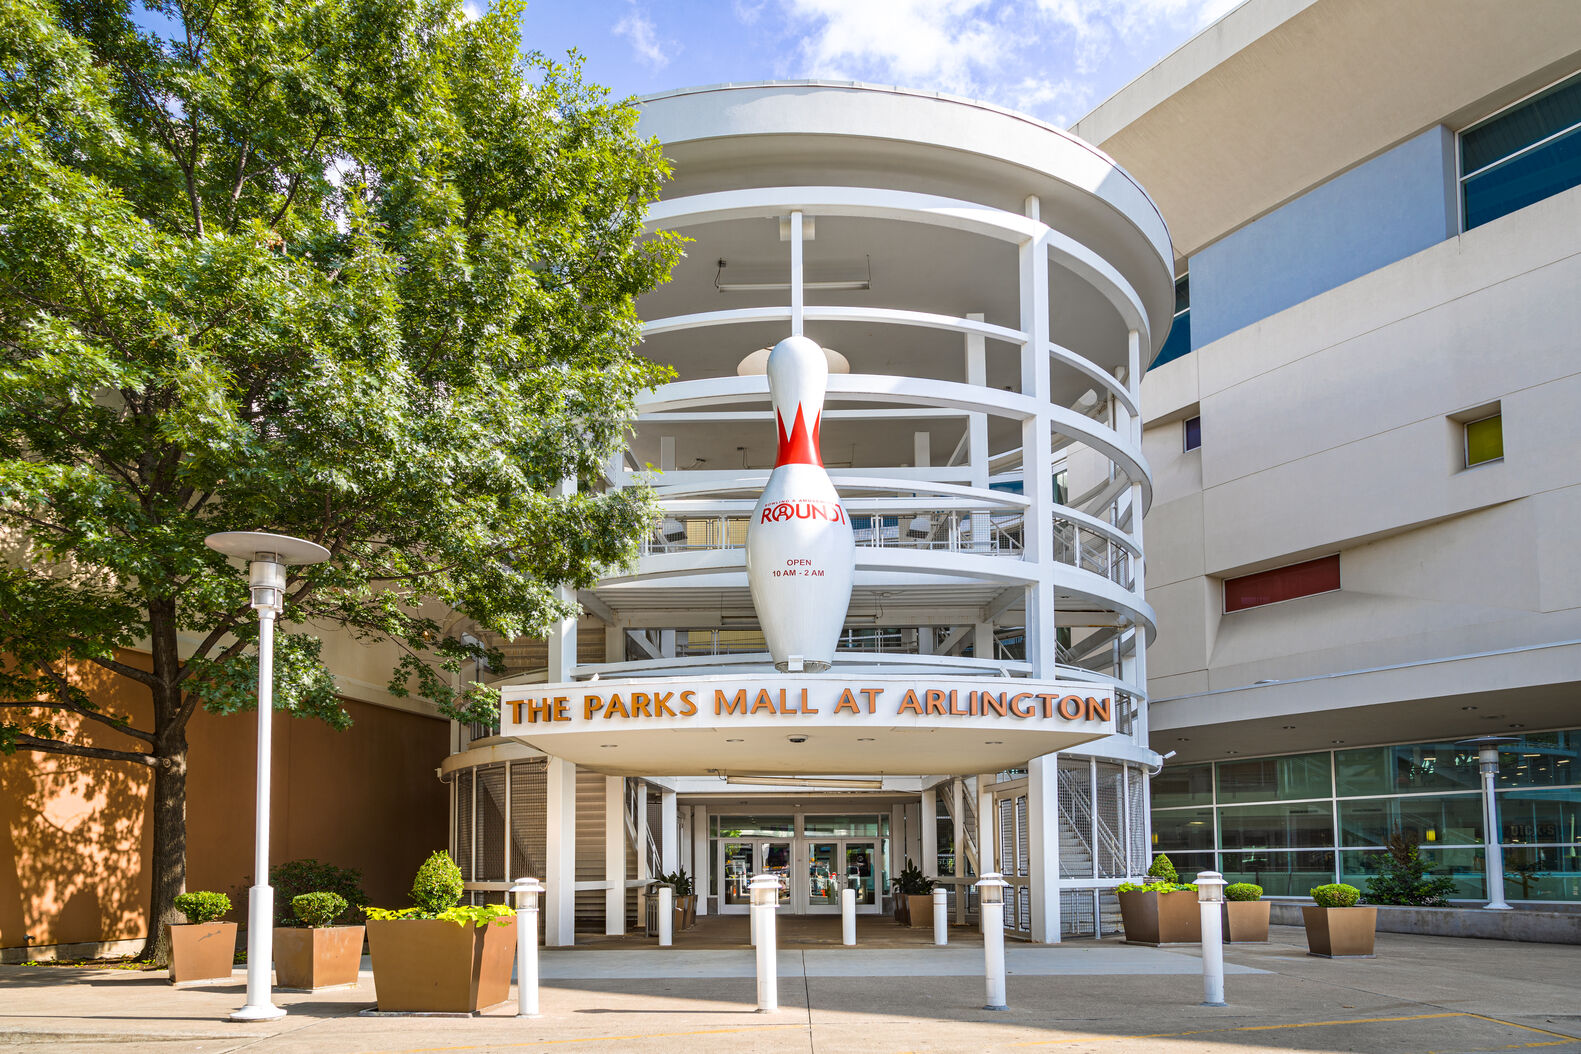 Exterior entrance to The Parks Mall at Arlington